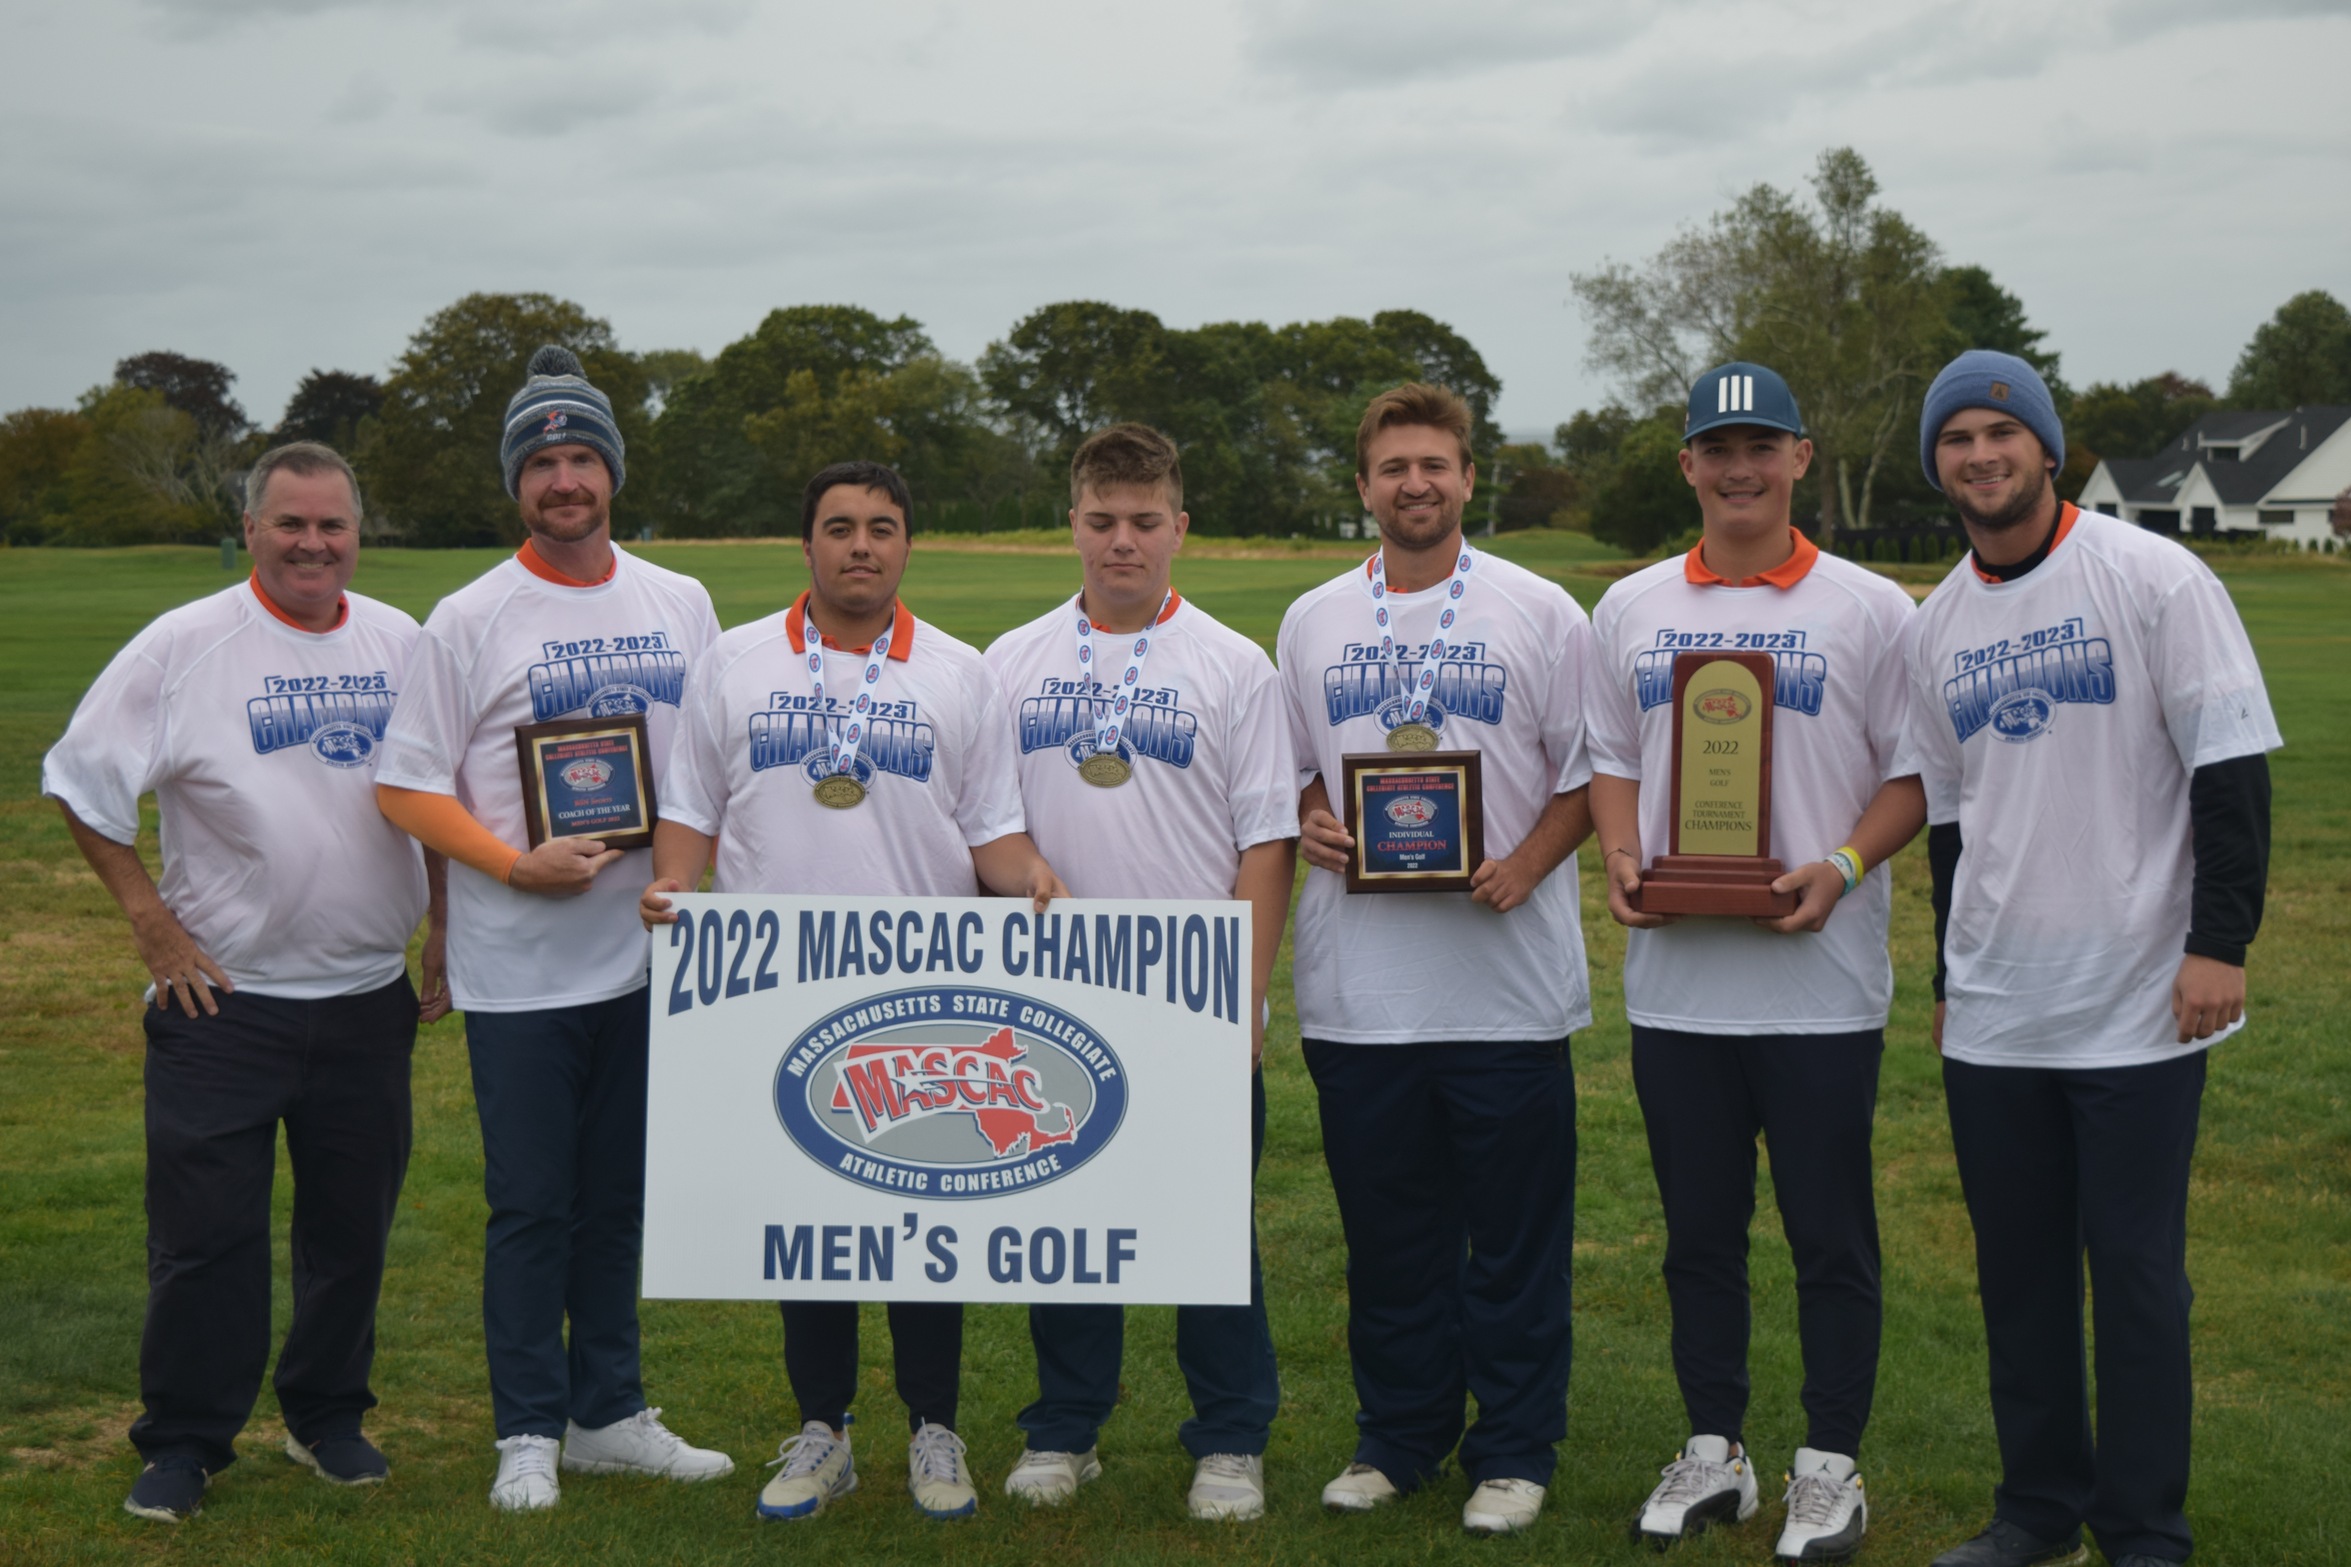 Cannata Leads Salem State to Second Consecutive MASCAC Title